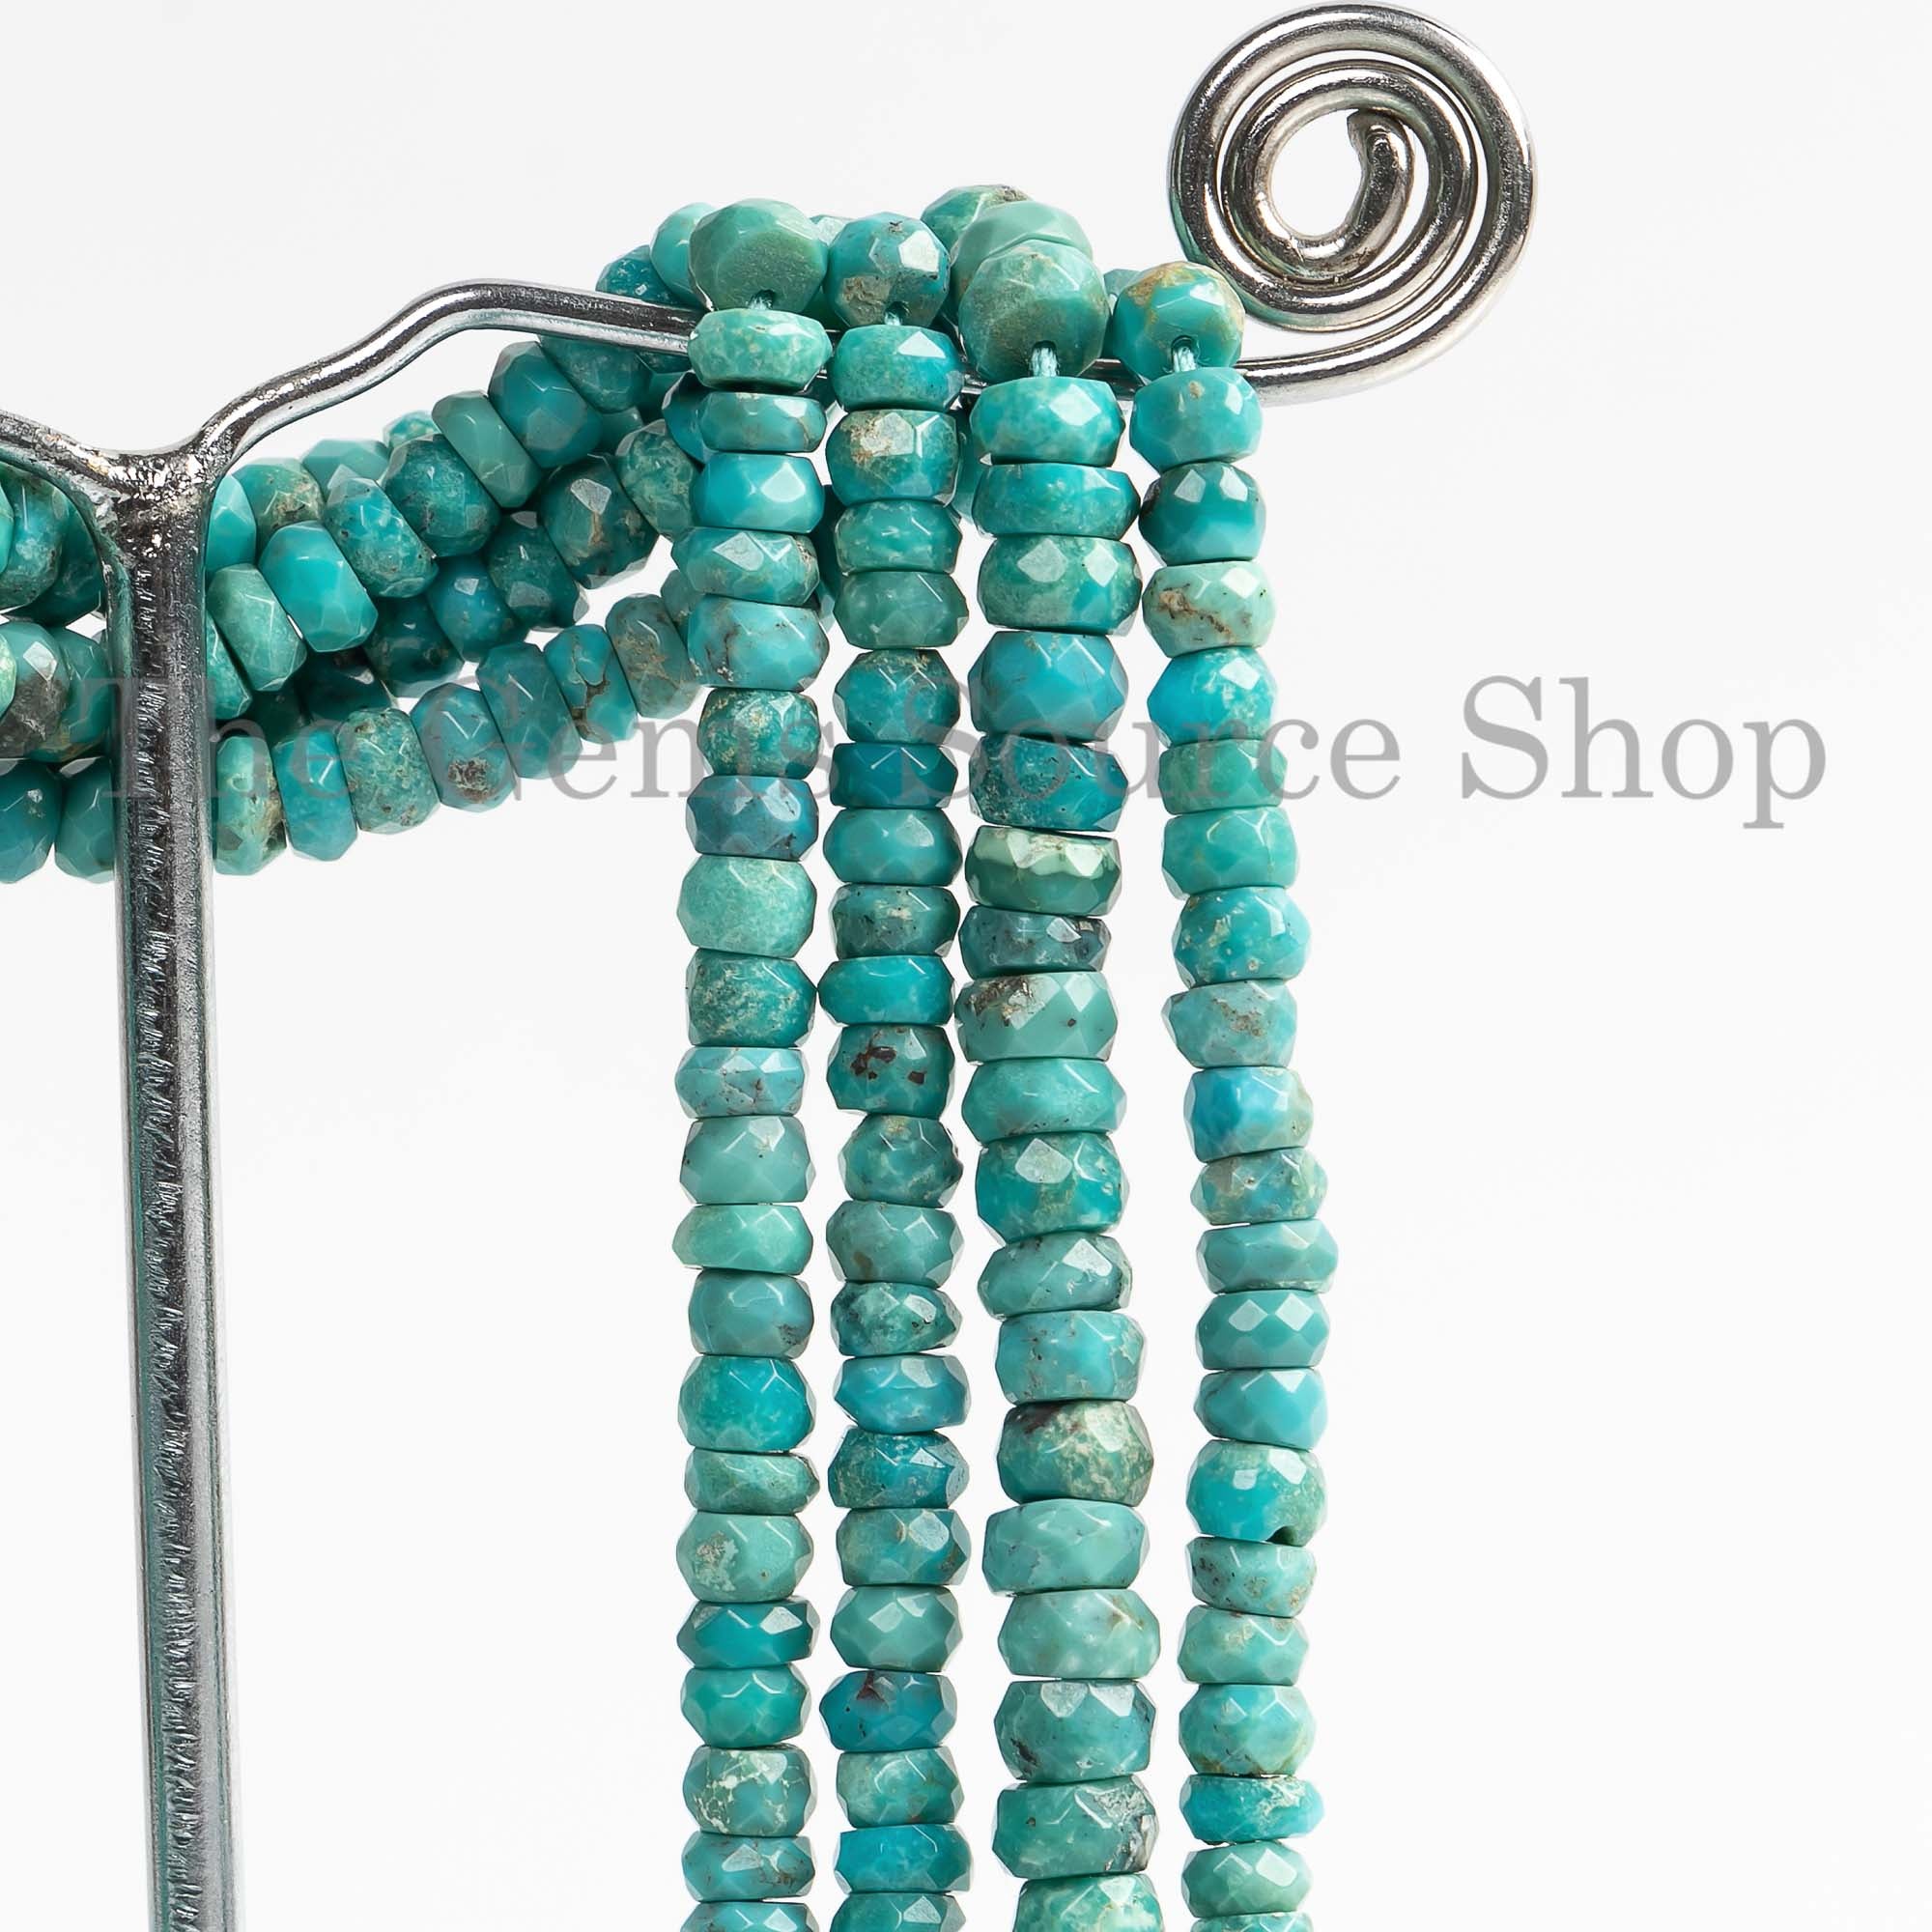 4.5-5.5mm Natural Turquoise Rondelle, Arizona Turquoise Beads, Faceted Beads, Turquoise Rondelle, Necklace Beads For Jewelry